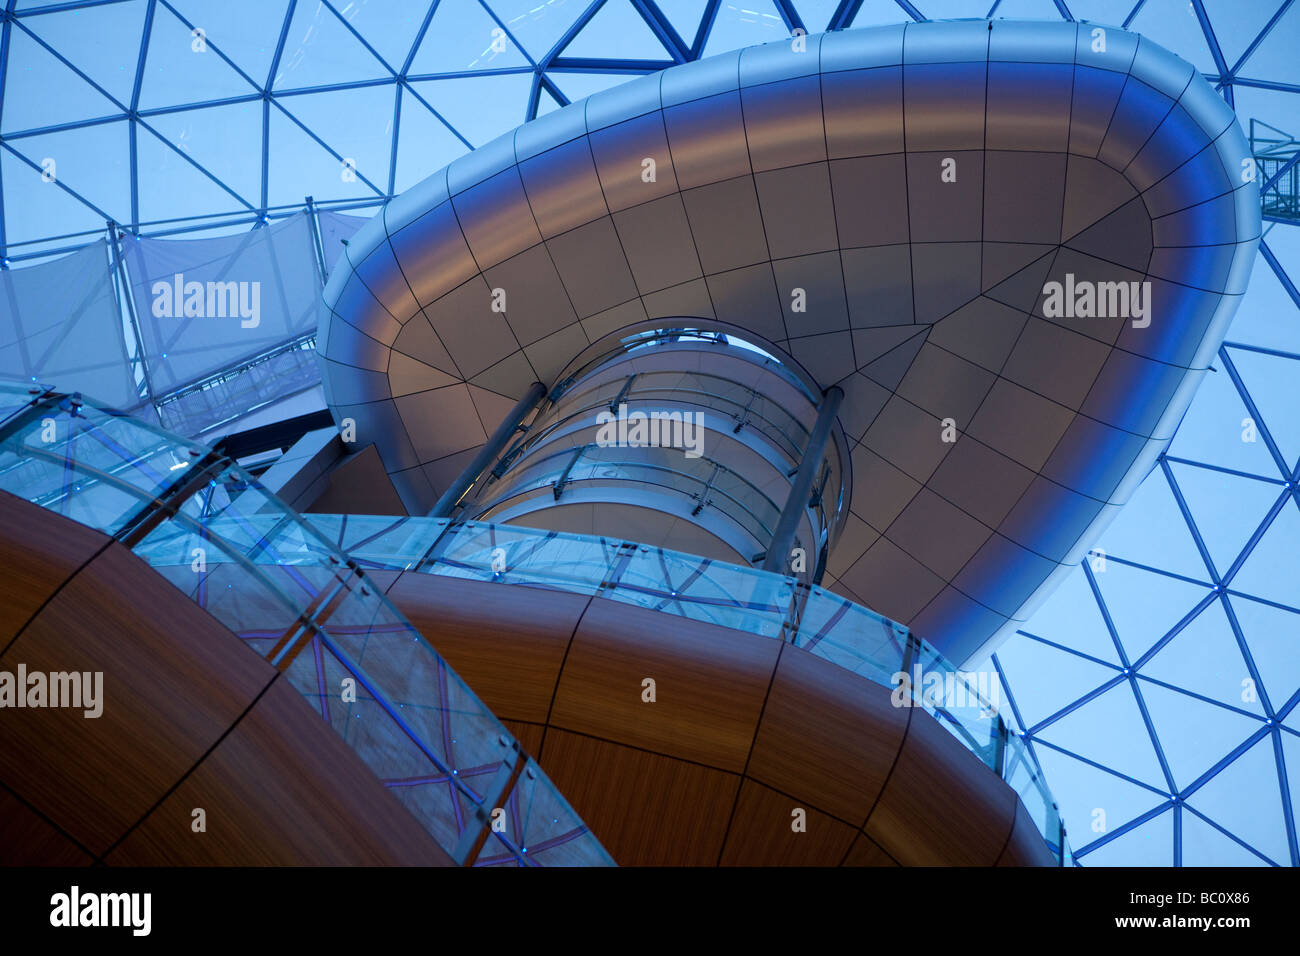 Dome of the Victoria Square (commercial center) in Belfast, Northern Ireland, United Kingdom, Europe Stock Photo